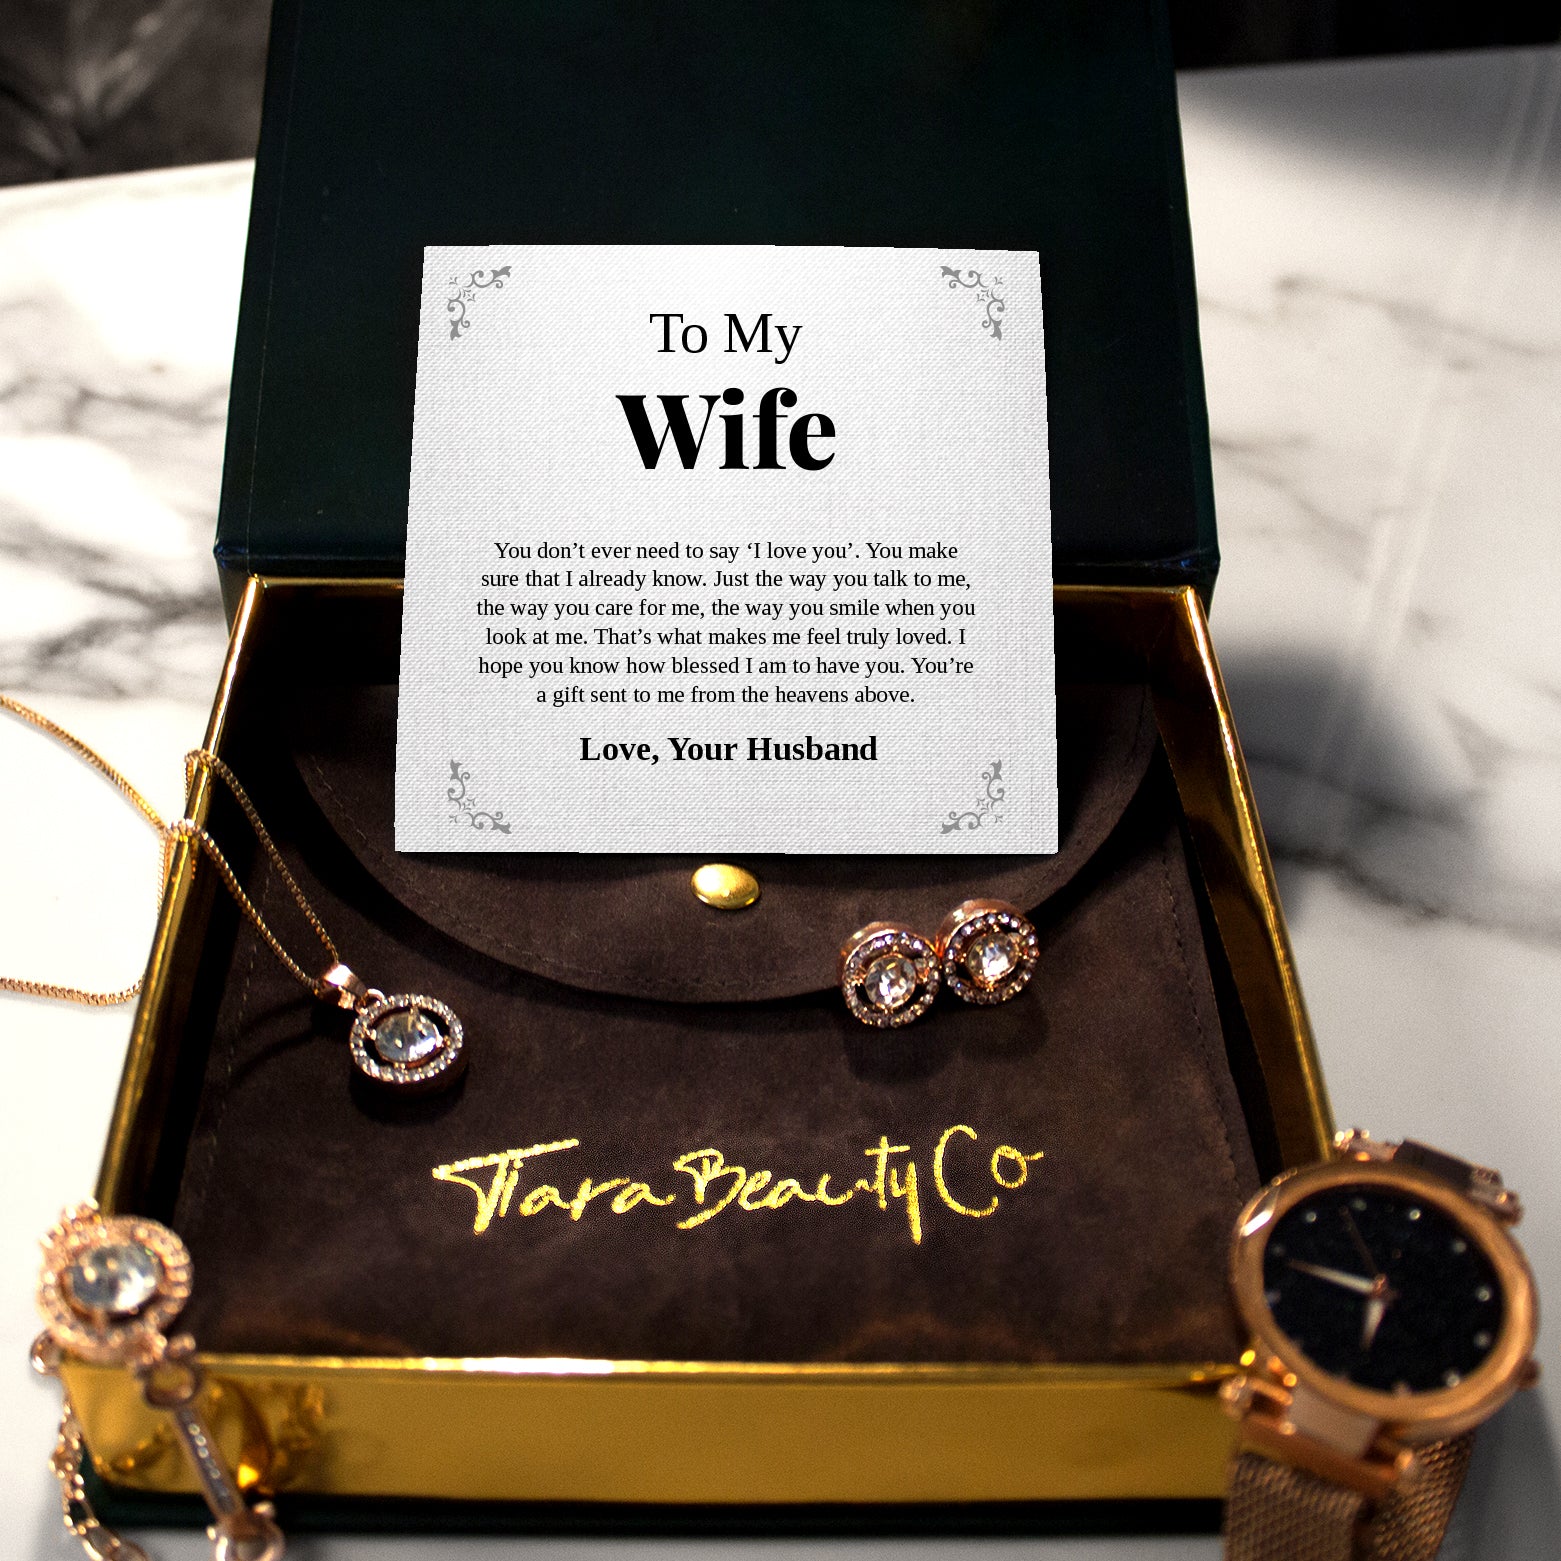 To My Wife | "Truly Loved" | Cosmopolitan Set